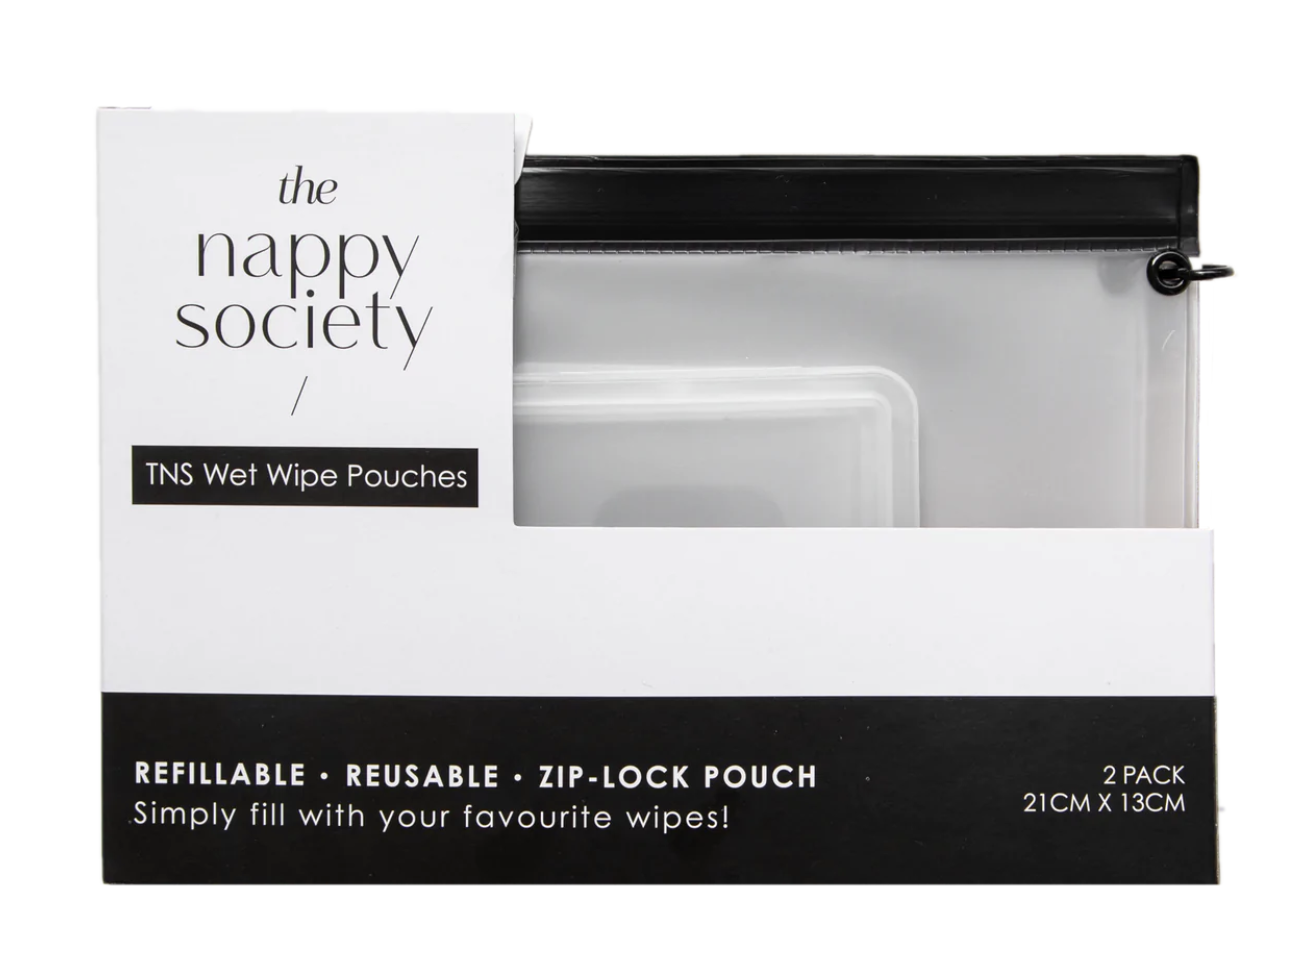 The Nappy Society Wet Wipe Pouch